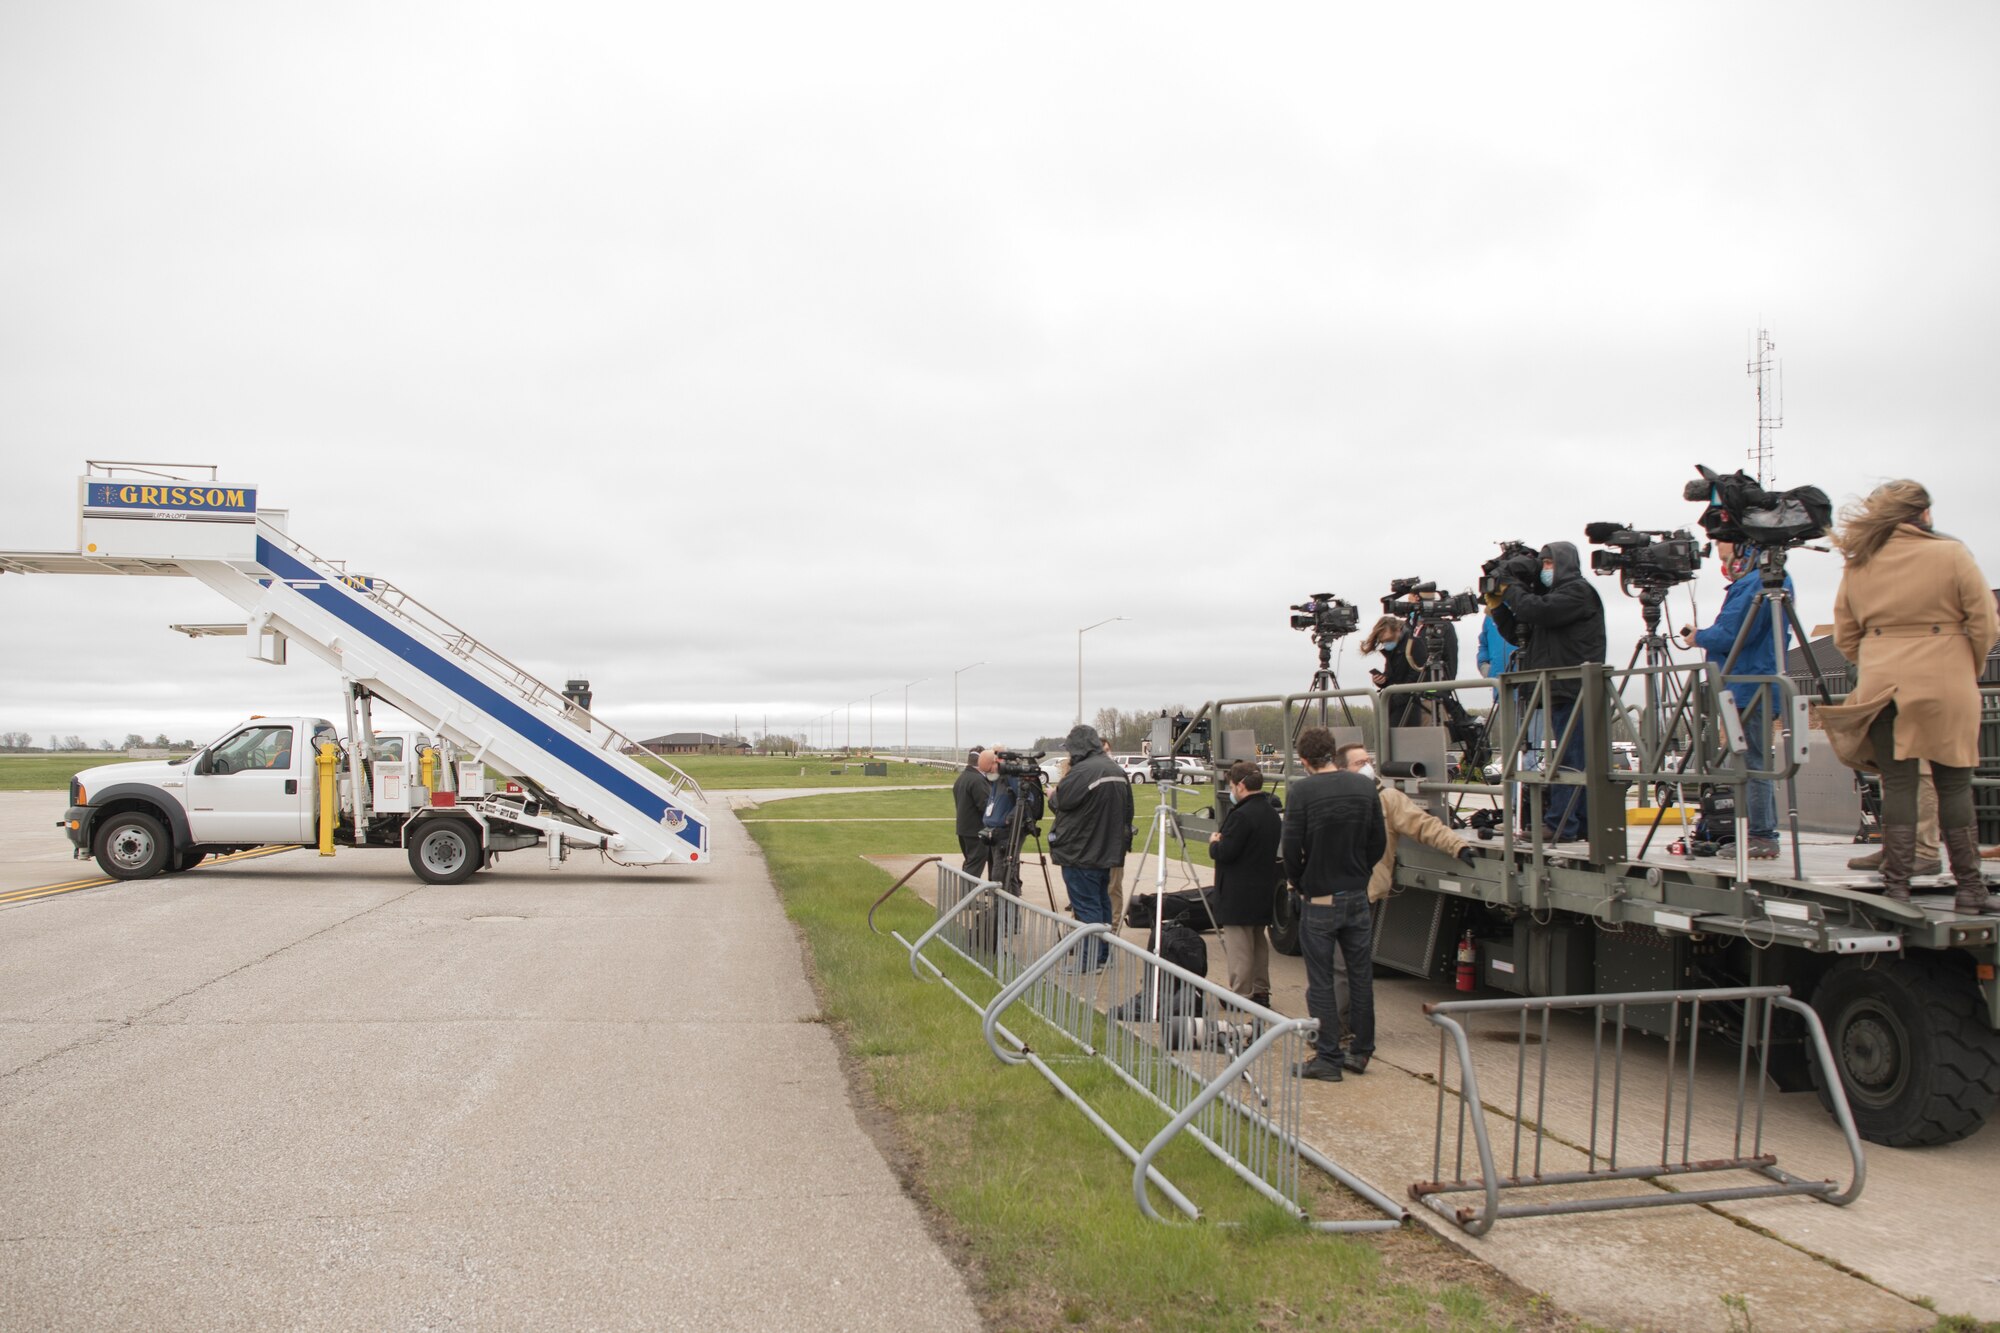 Twelve media outlets came to witness Vice President Mike Pence’s arrival at Grissom Air Reserve Base, Indiana April 30, 2020. Pence came to Indiana to meet with local business leaders who are building ventilators during the COVID-19 outbreak. (U.S Air Force photo/Ben Mota)